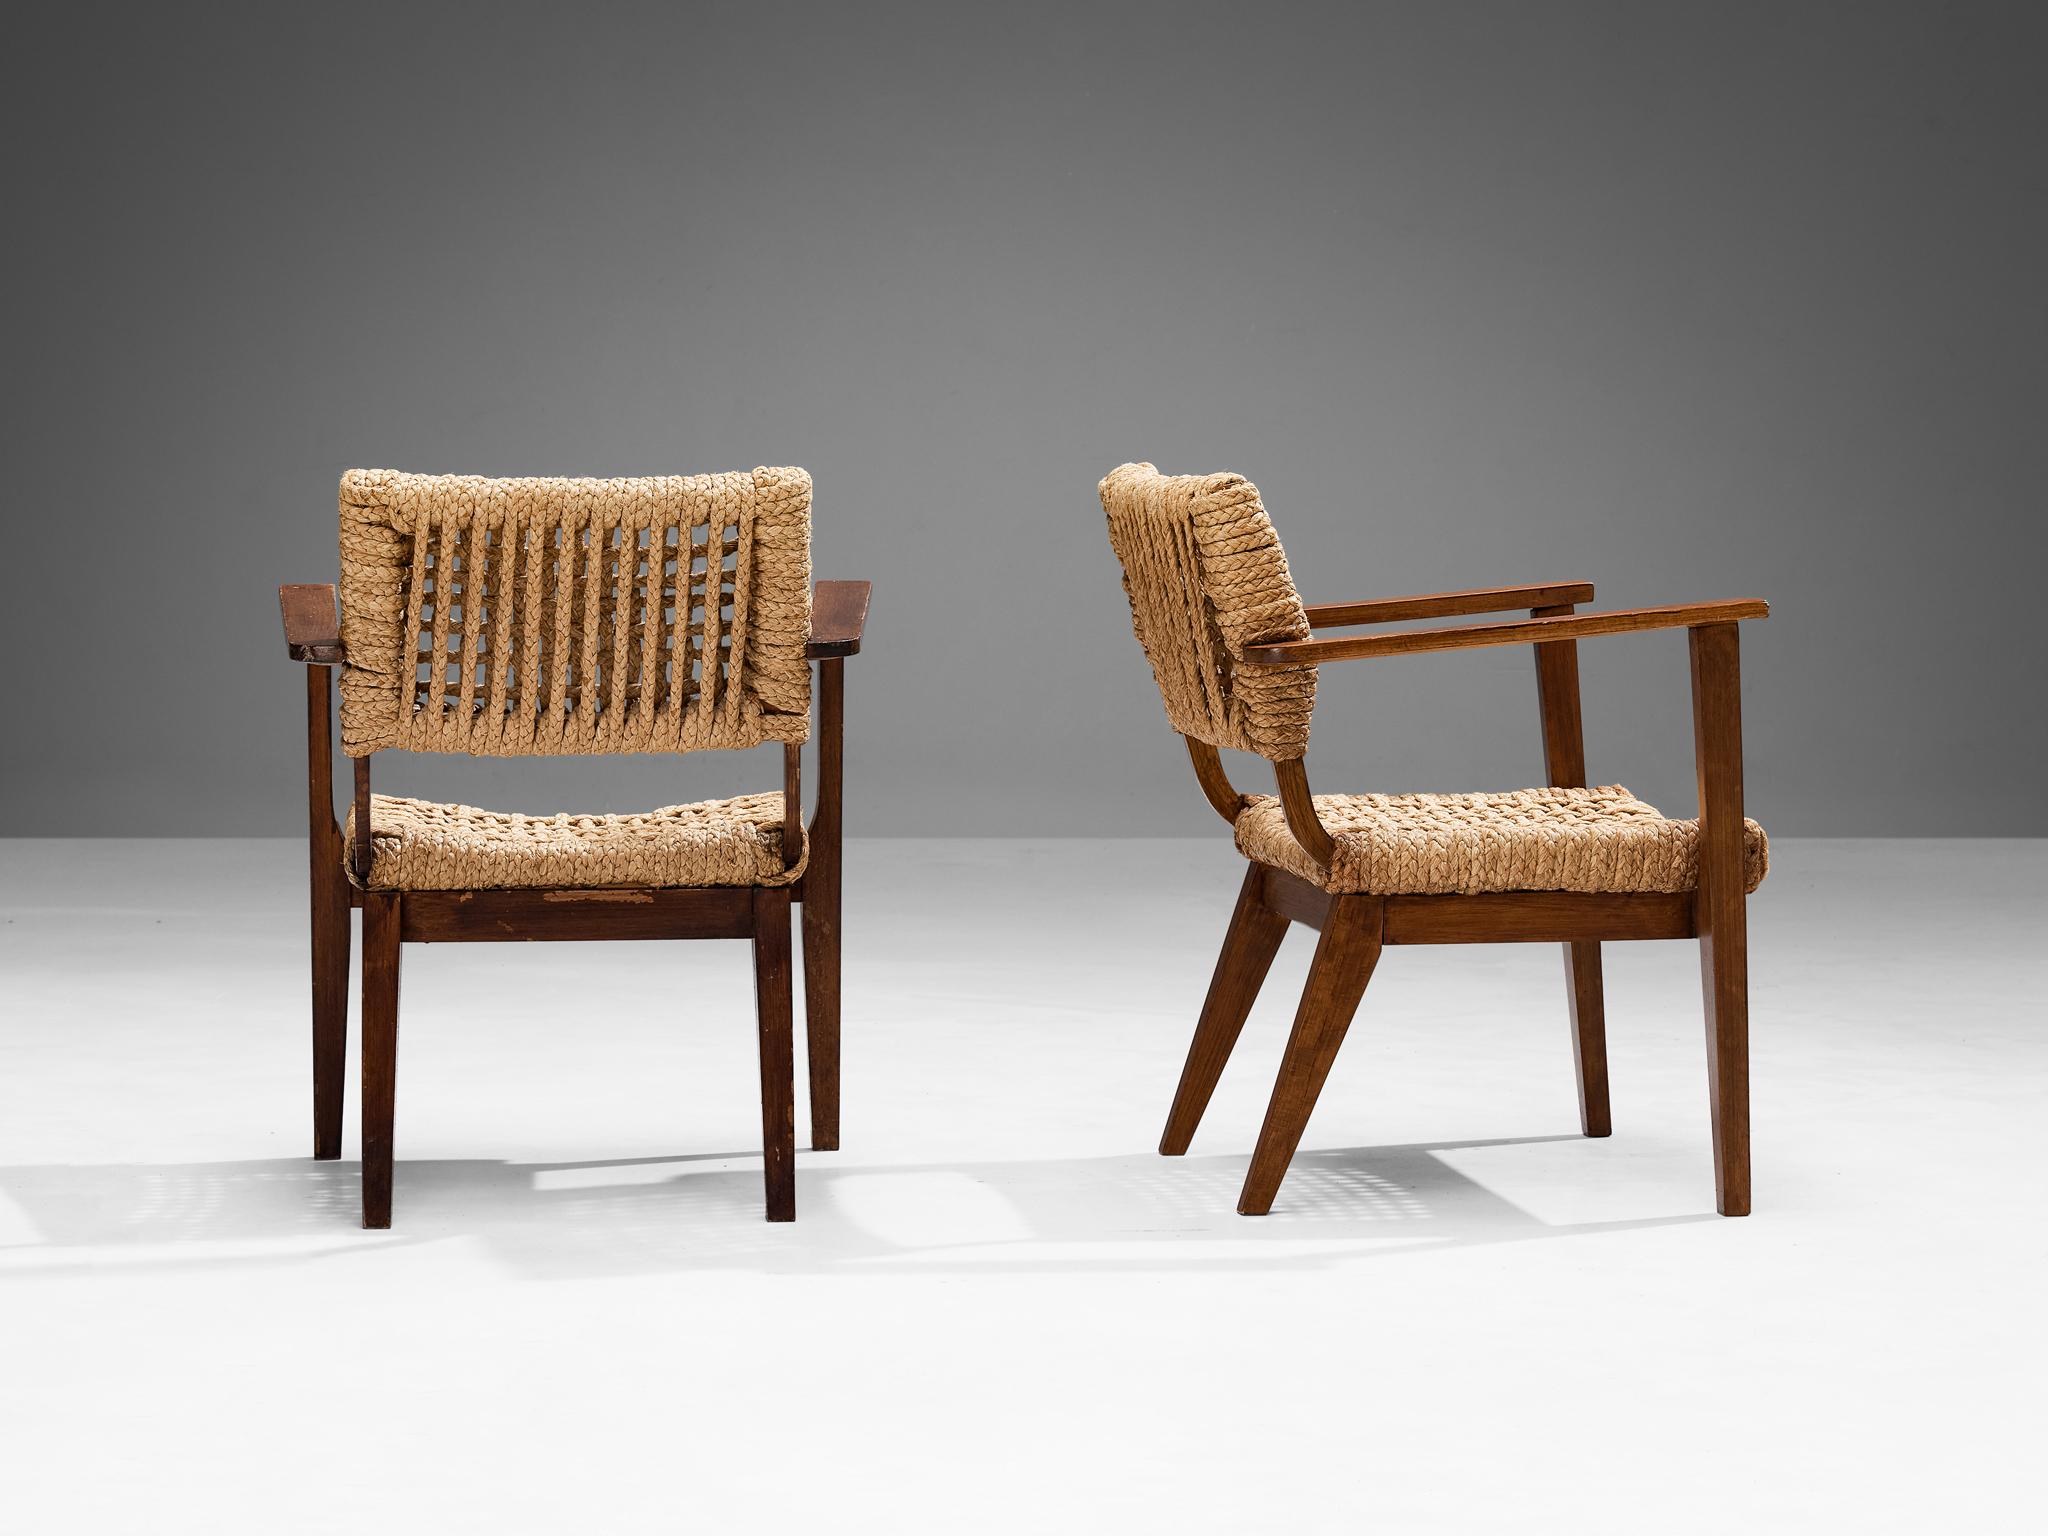 French Adrian & Frida Minet for Vibo Pair of Armchairs in Wicker Straw 